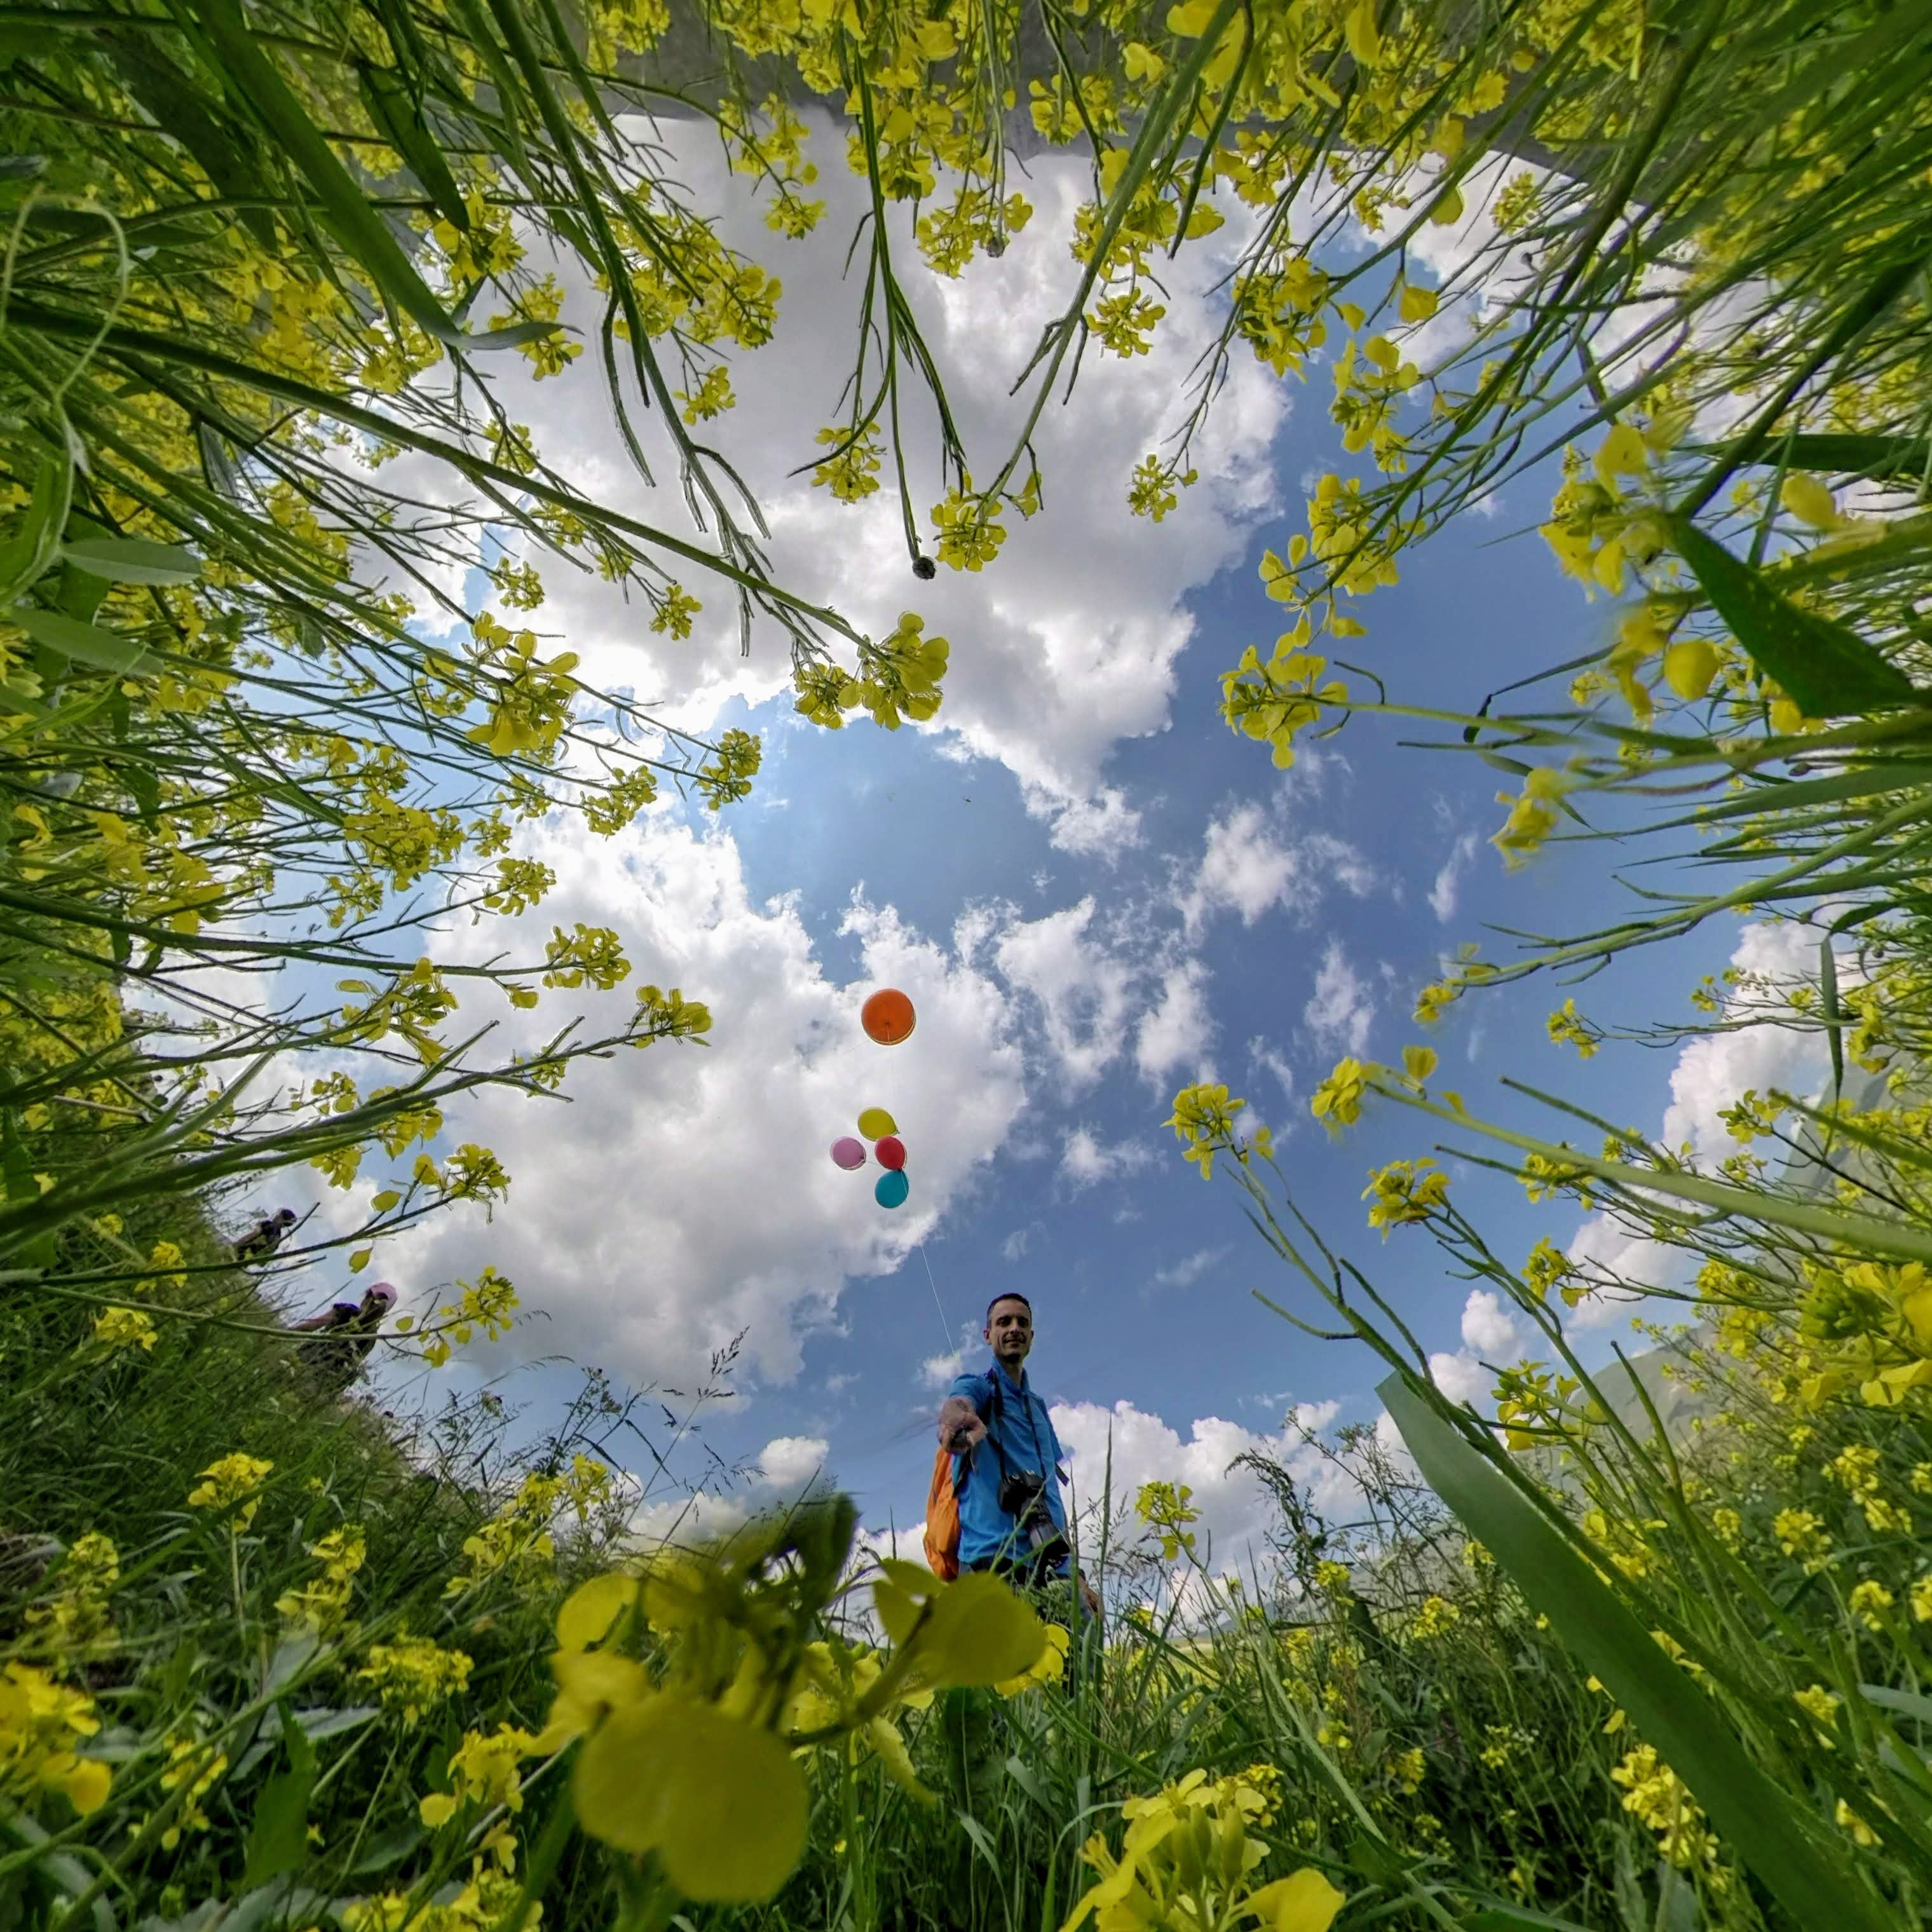 360 selfie photo while holding balloons took from inside the flowers - Local guide @LuigiZ